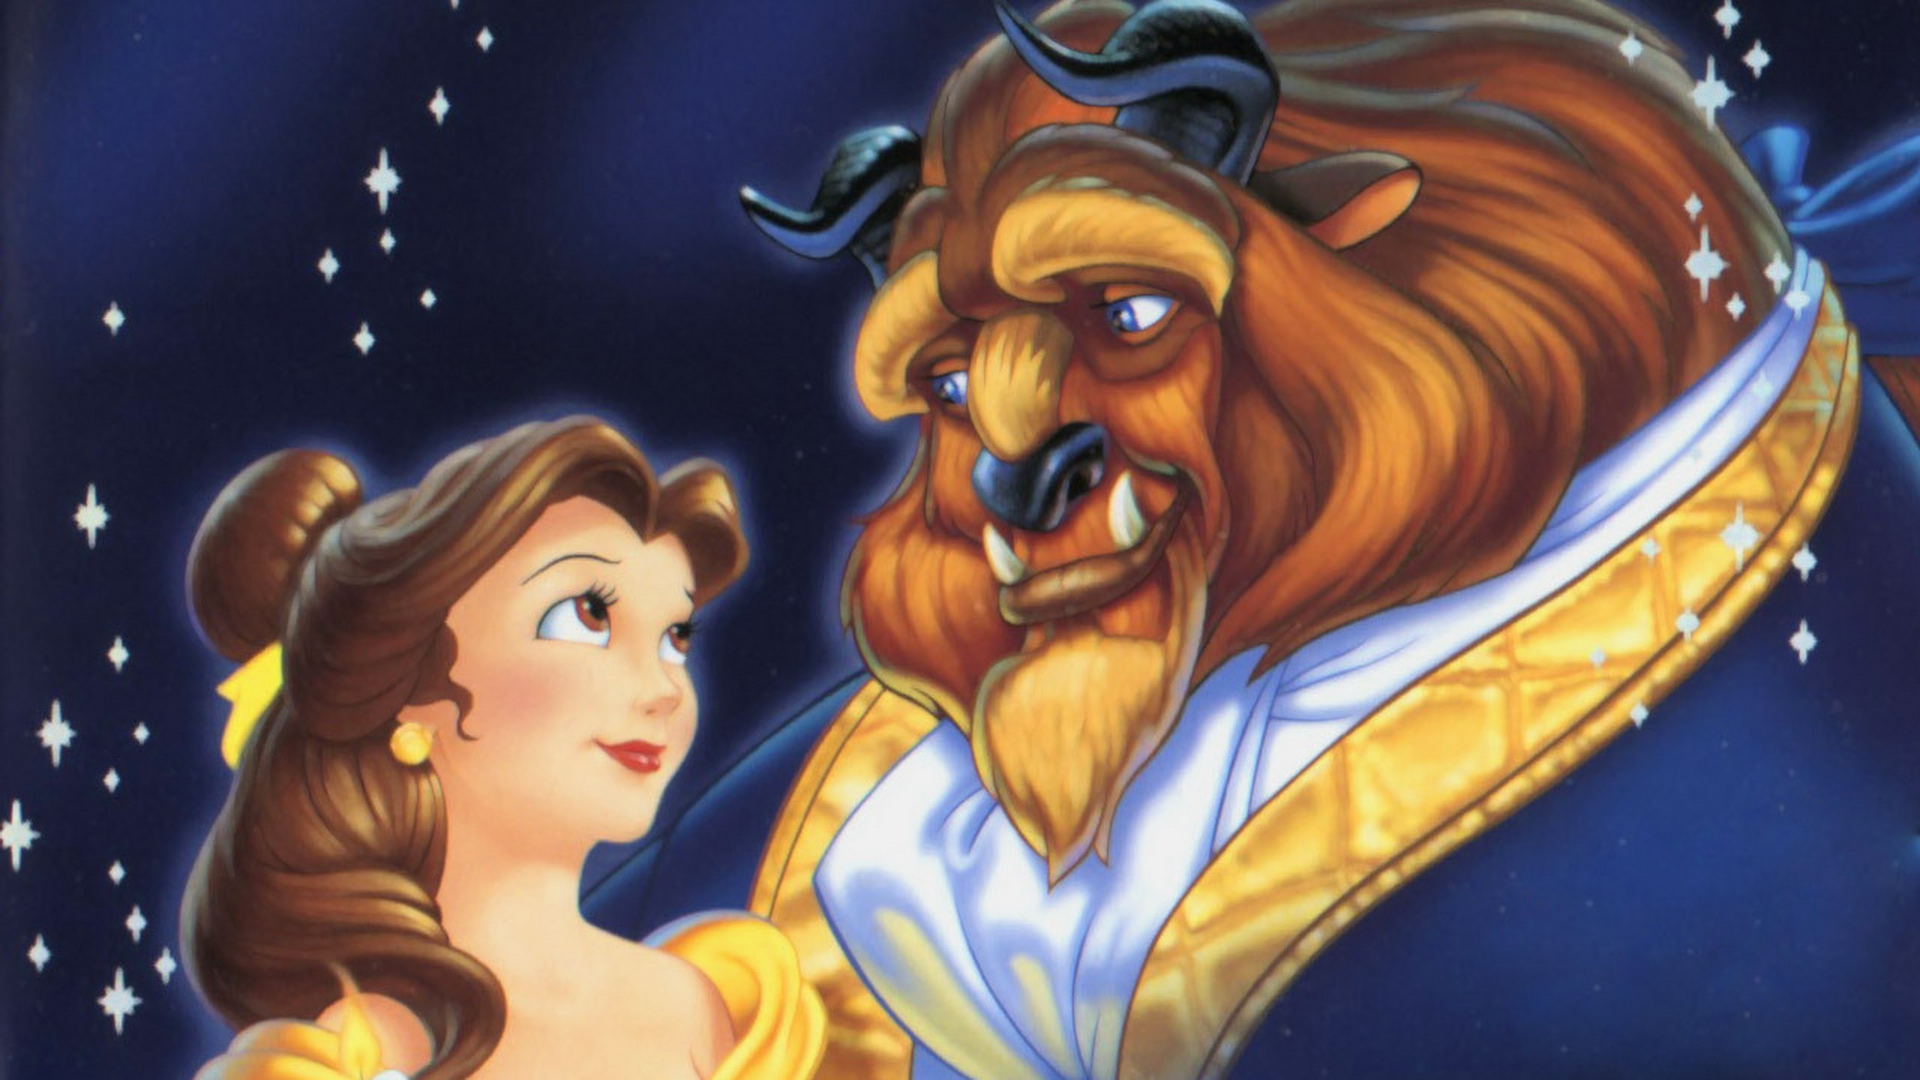 Beauty And The Beast - Beauty And The Beast Original Cover , HD Wallpaper & Backgrounds